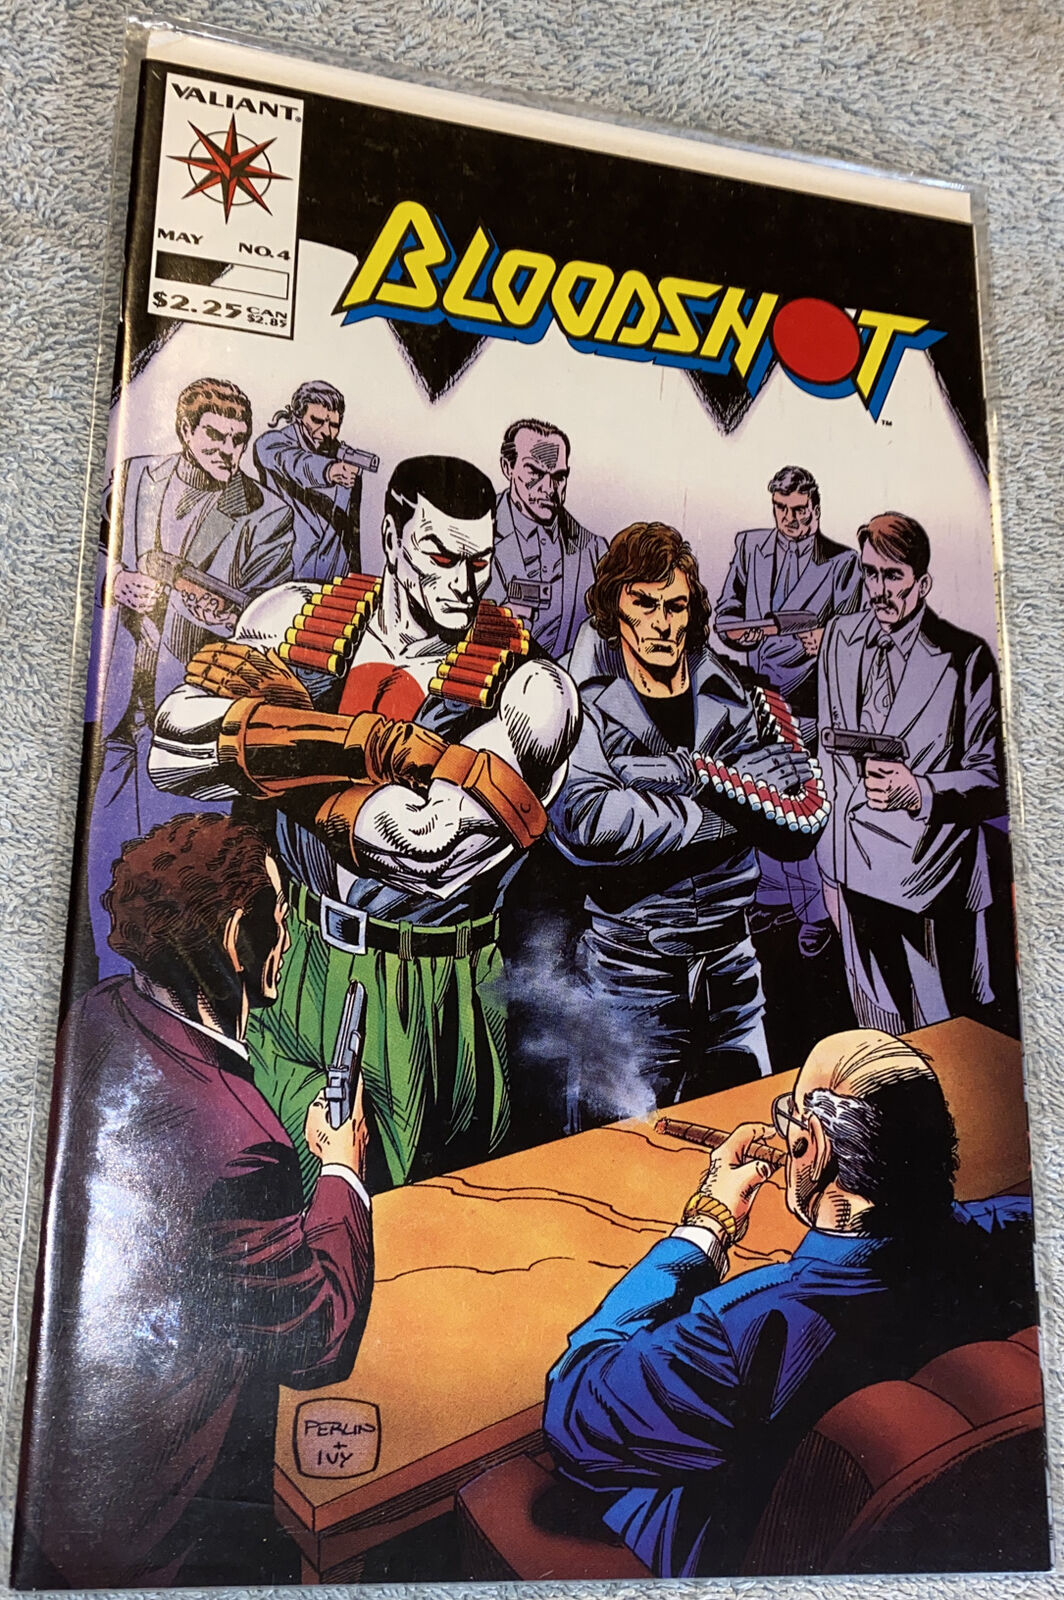 Bloodshot #4 May 1993 Valiant The Blood of Ages Comic Book